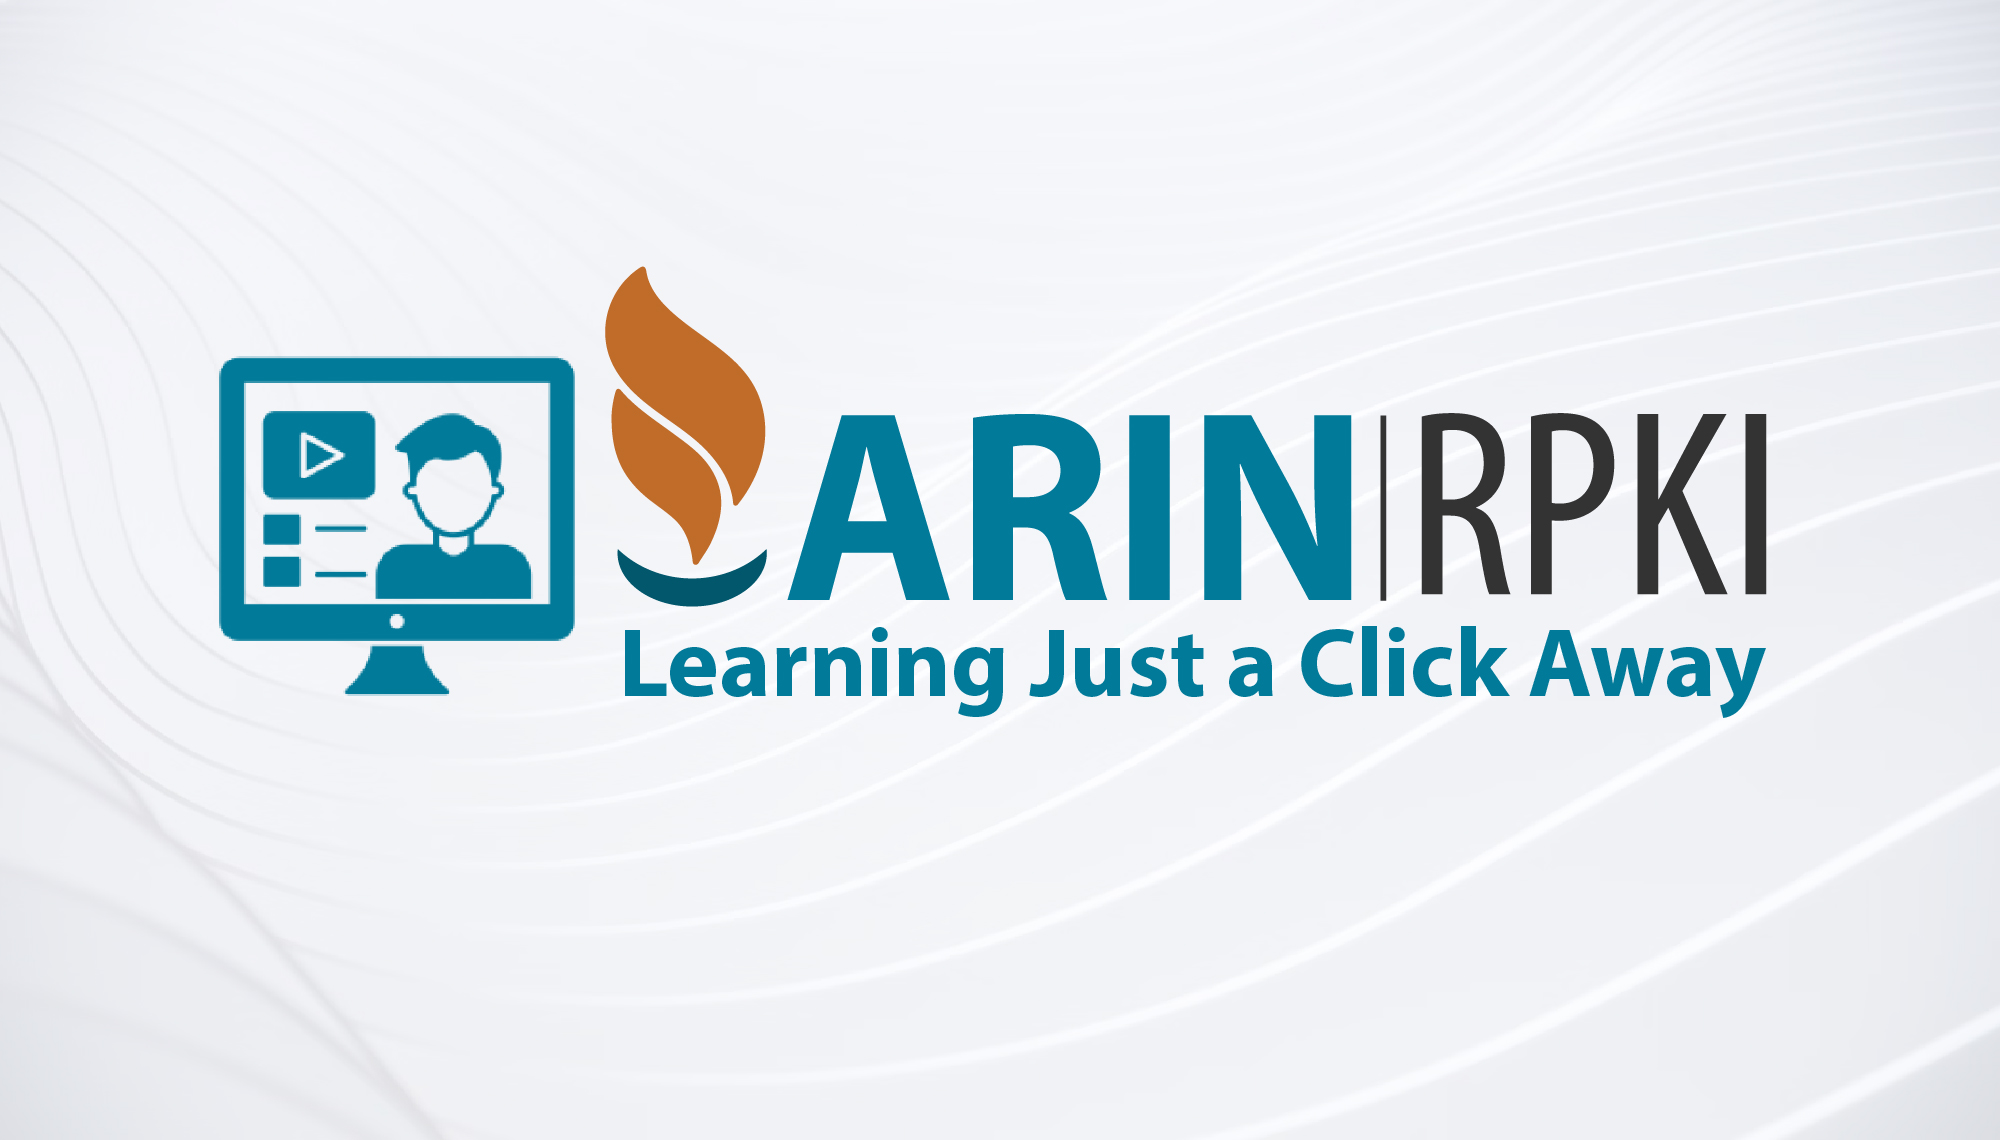 RPKI Learning Just a Click Away